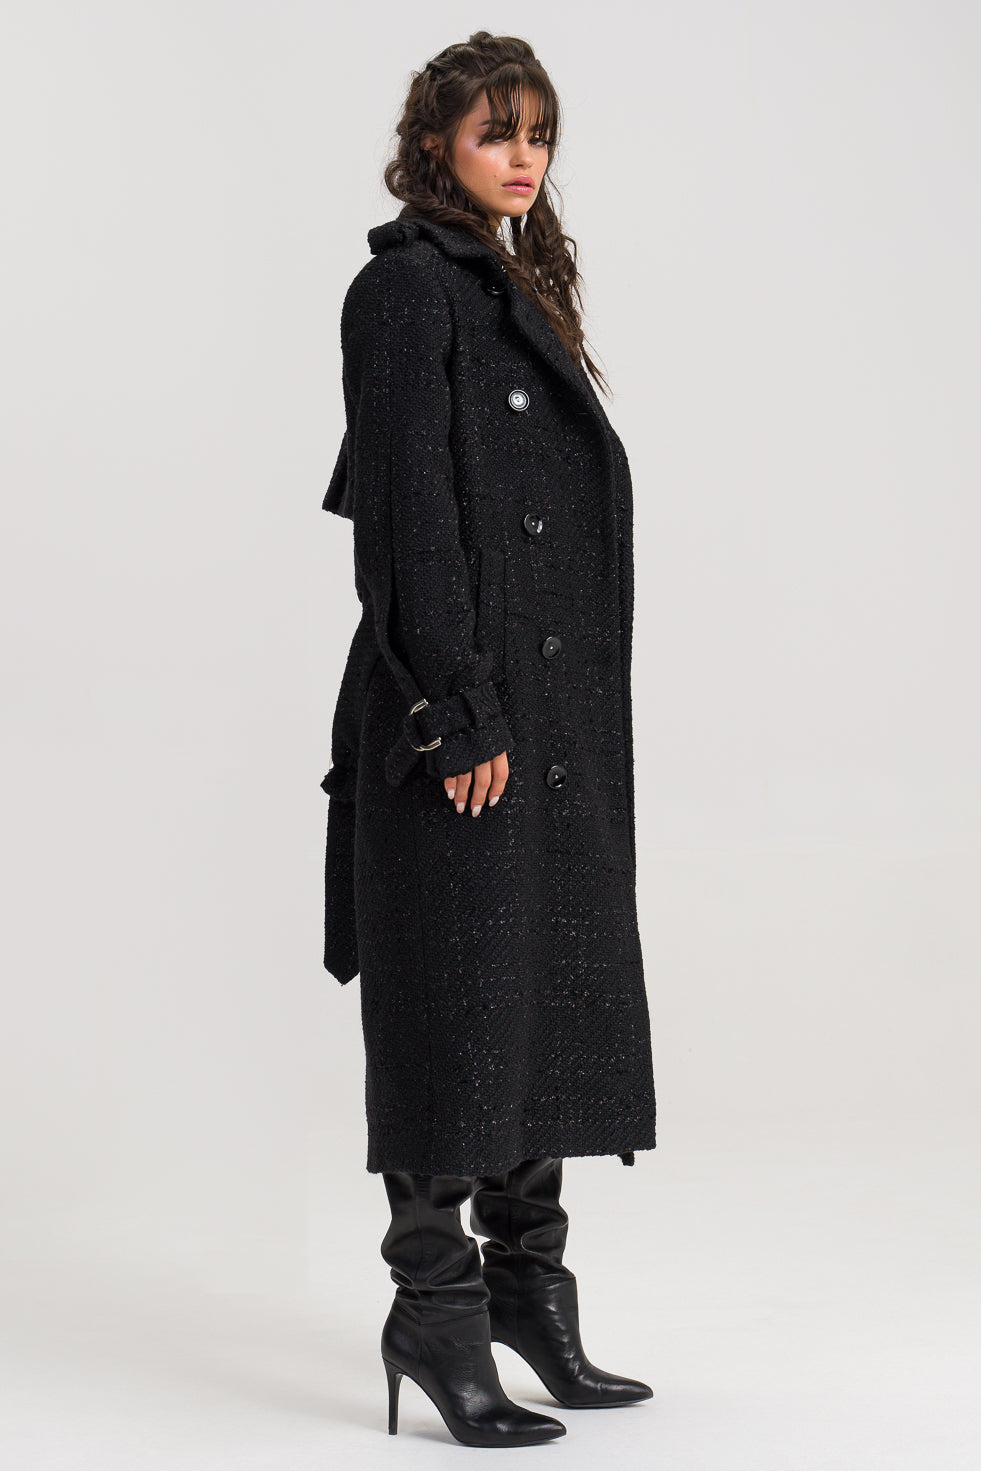 'Nyra' Double-Breasted Tweed Trench - Coat